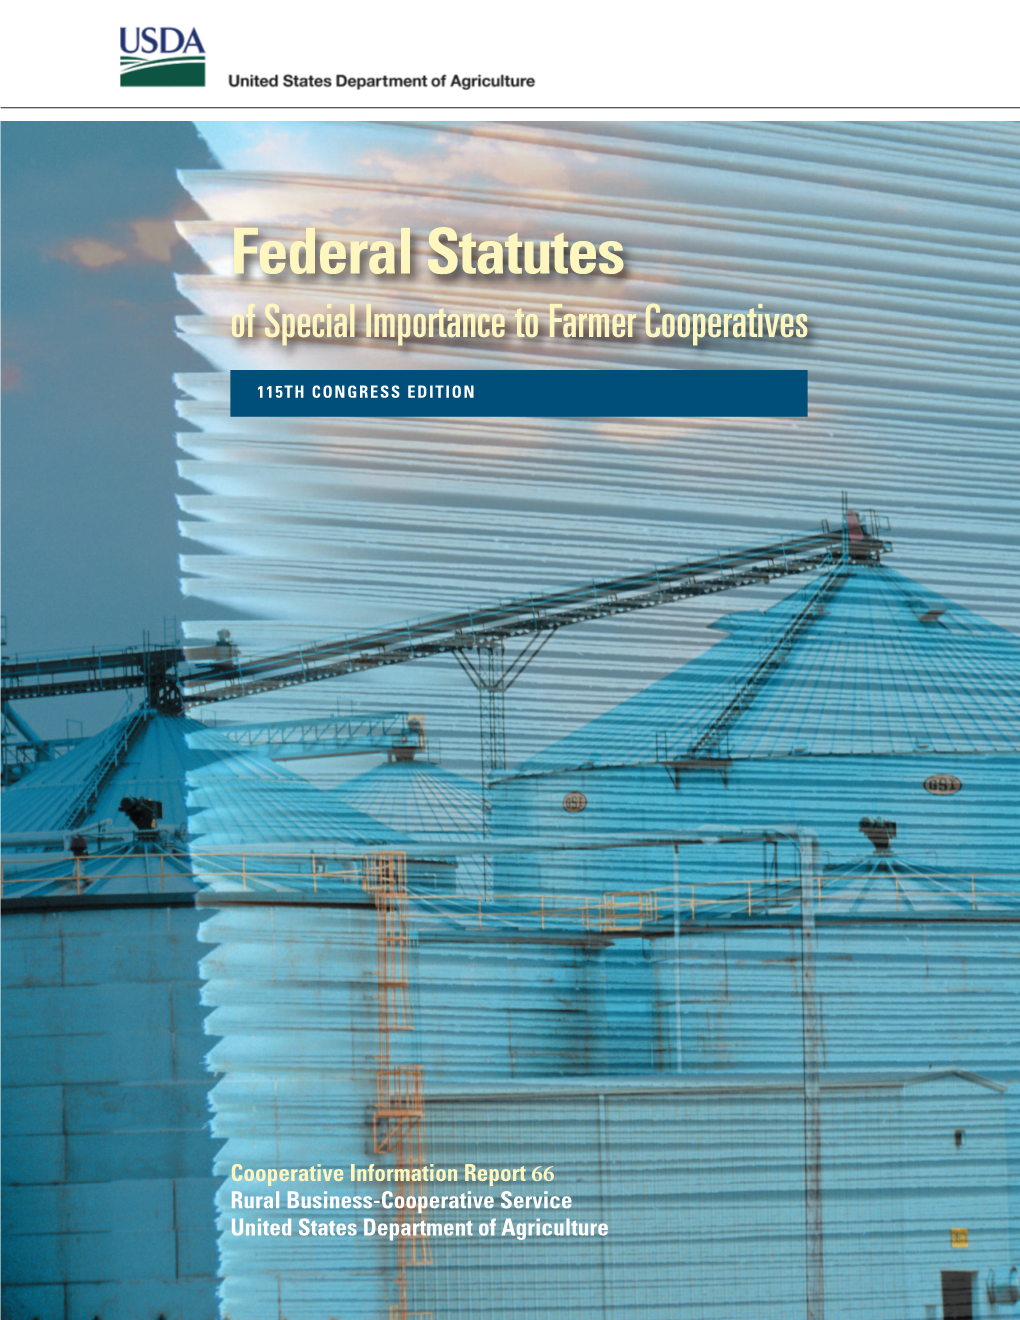 Federal Statutes of Special Importance to Farmer Cooperatives